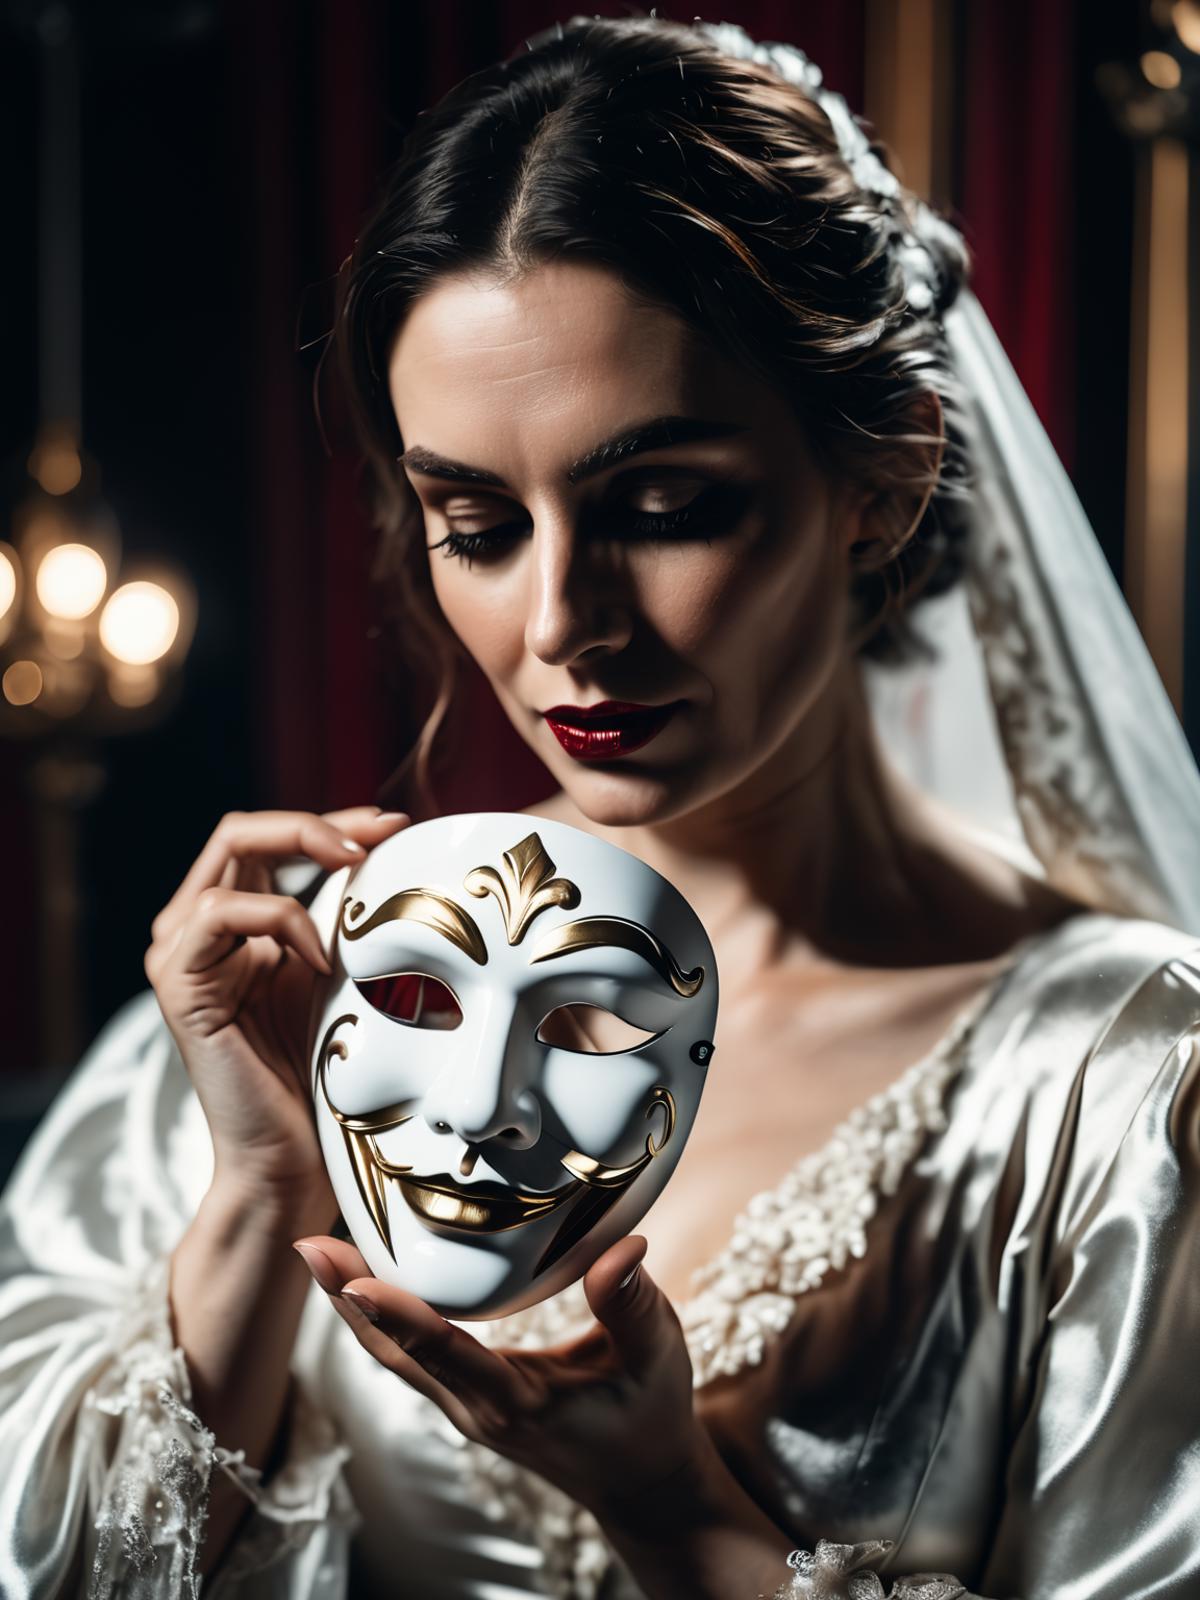 Woman in a wedding veil holding a mask to her face.